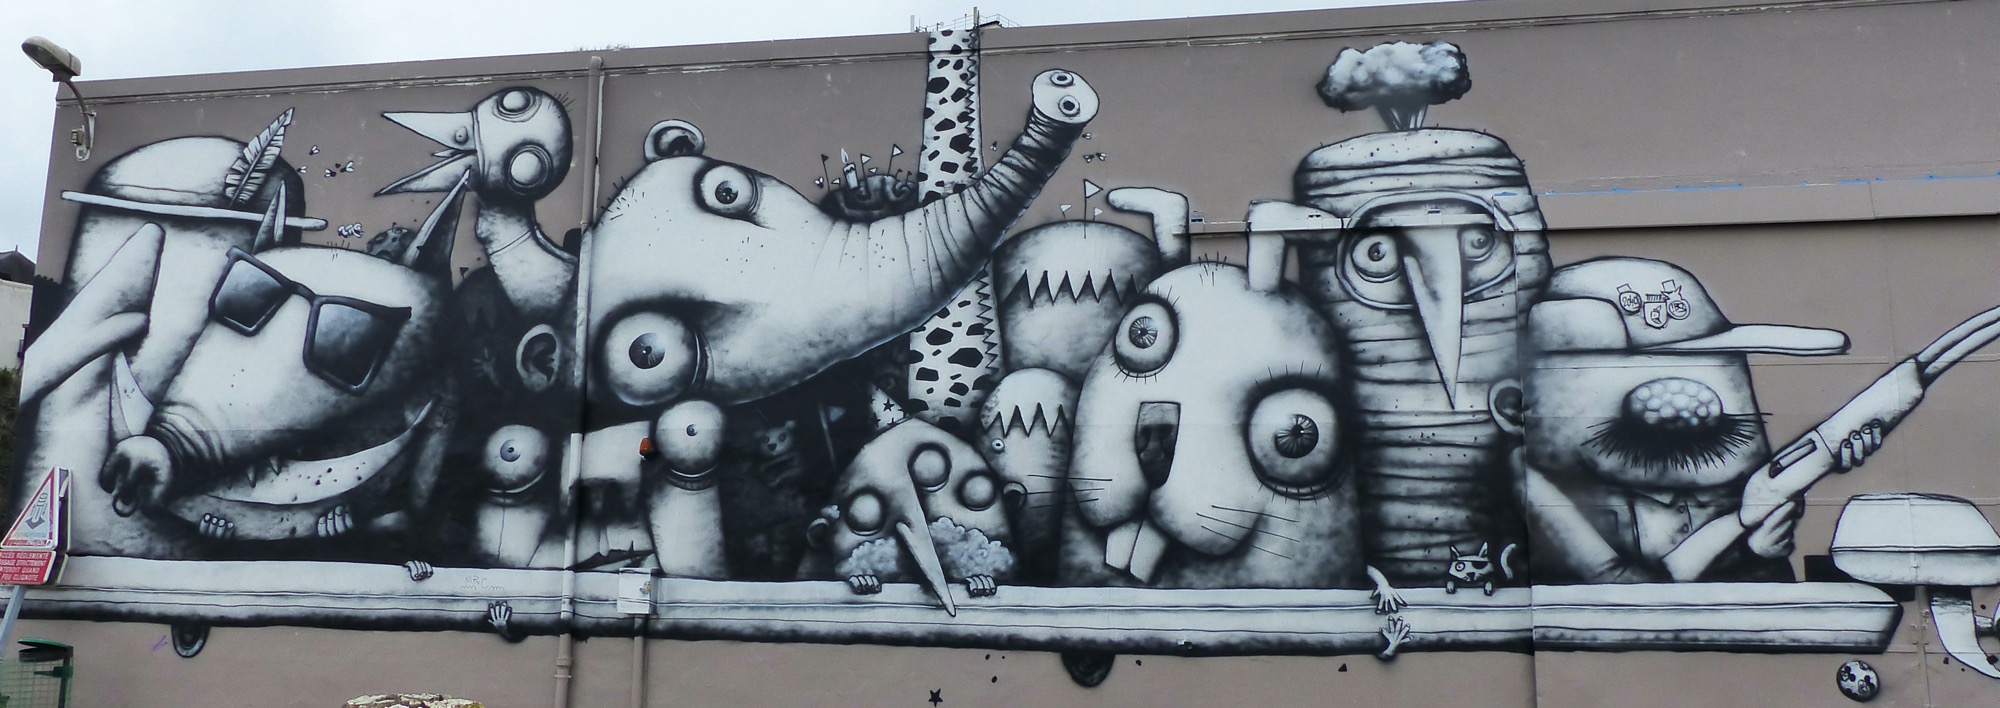 Graffiti 9  by the artist Ador captured by Rabot in Nantes France